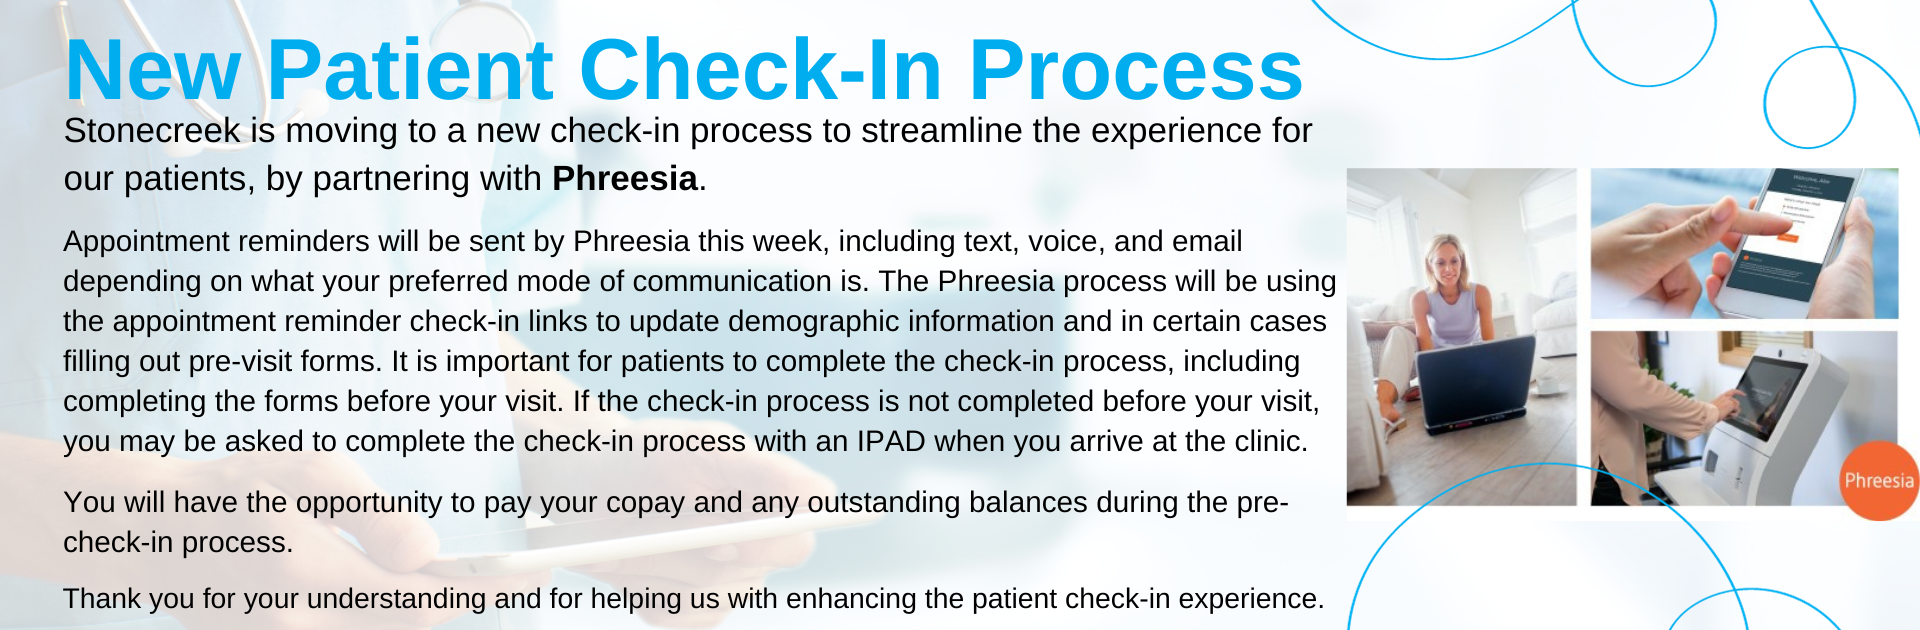 New Patient Check-In Process